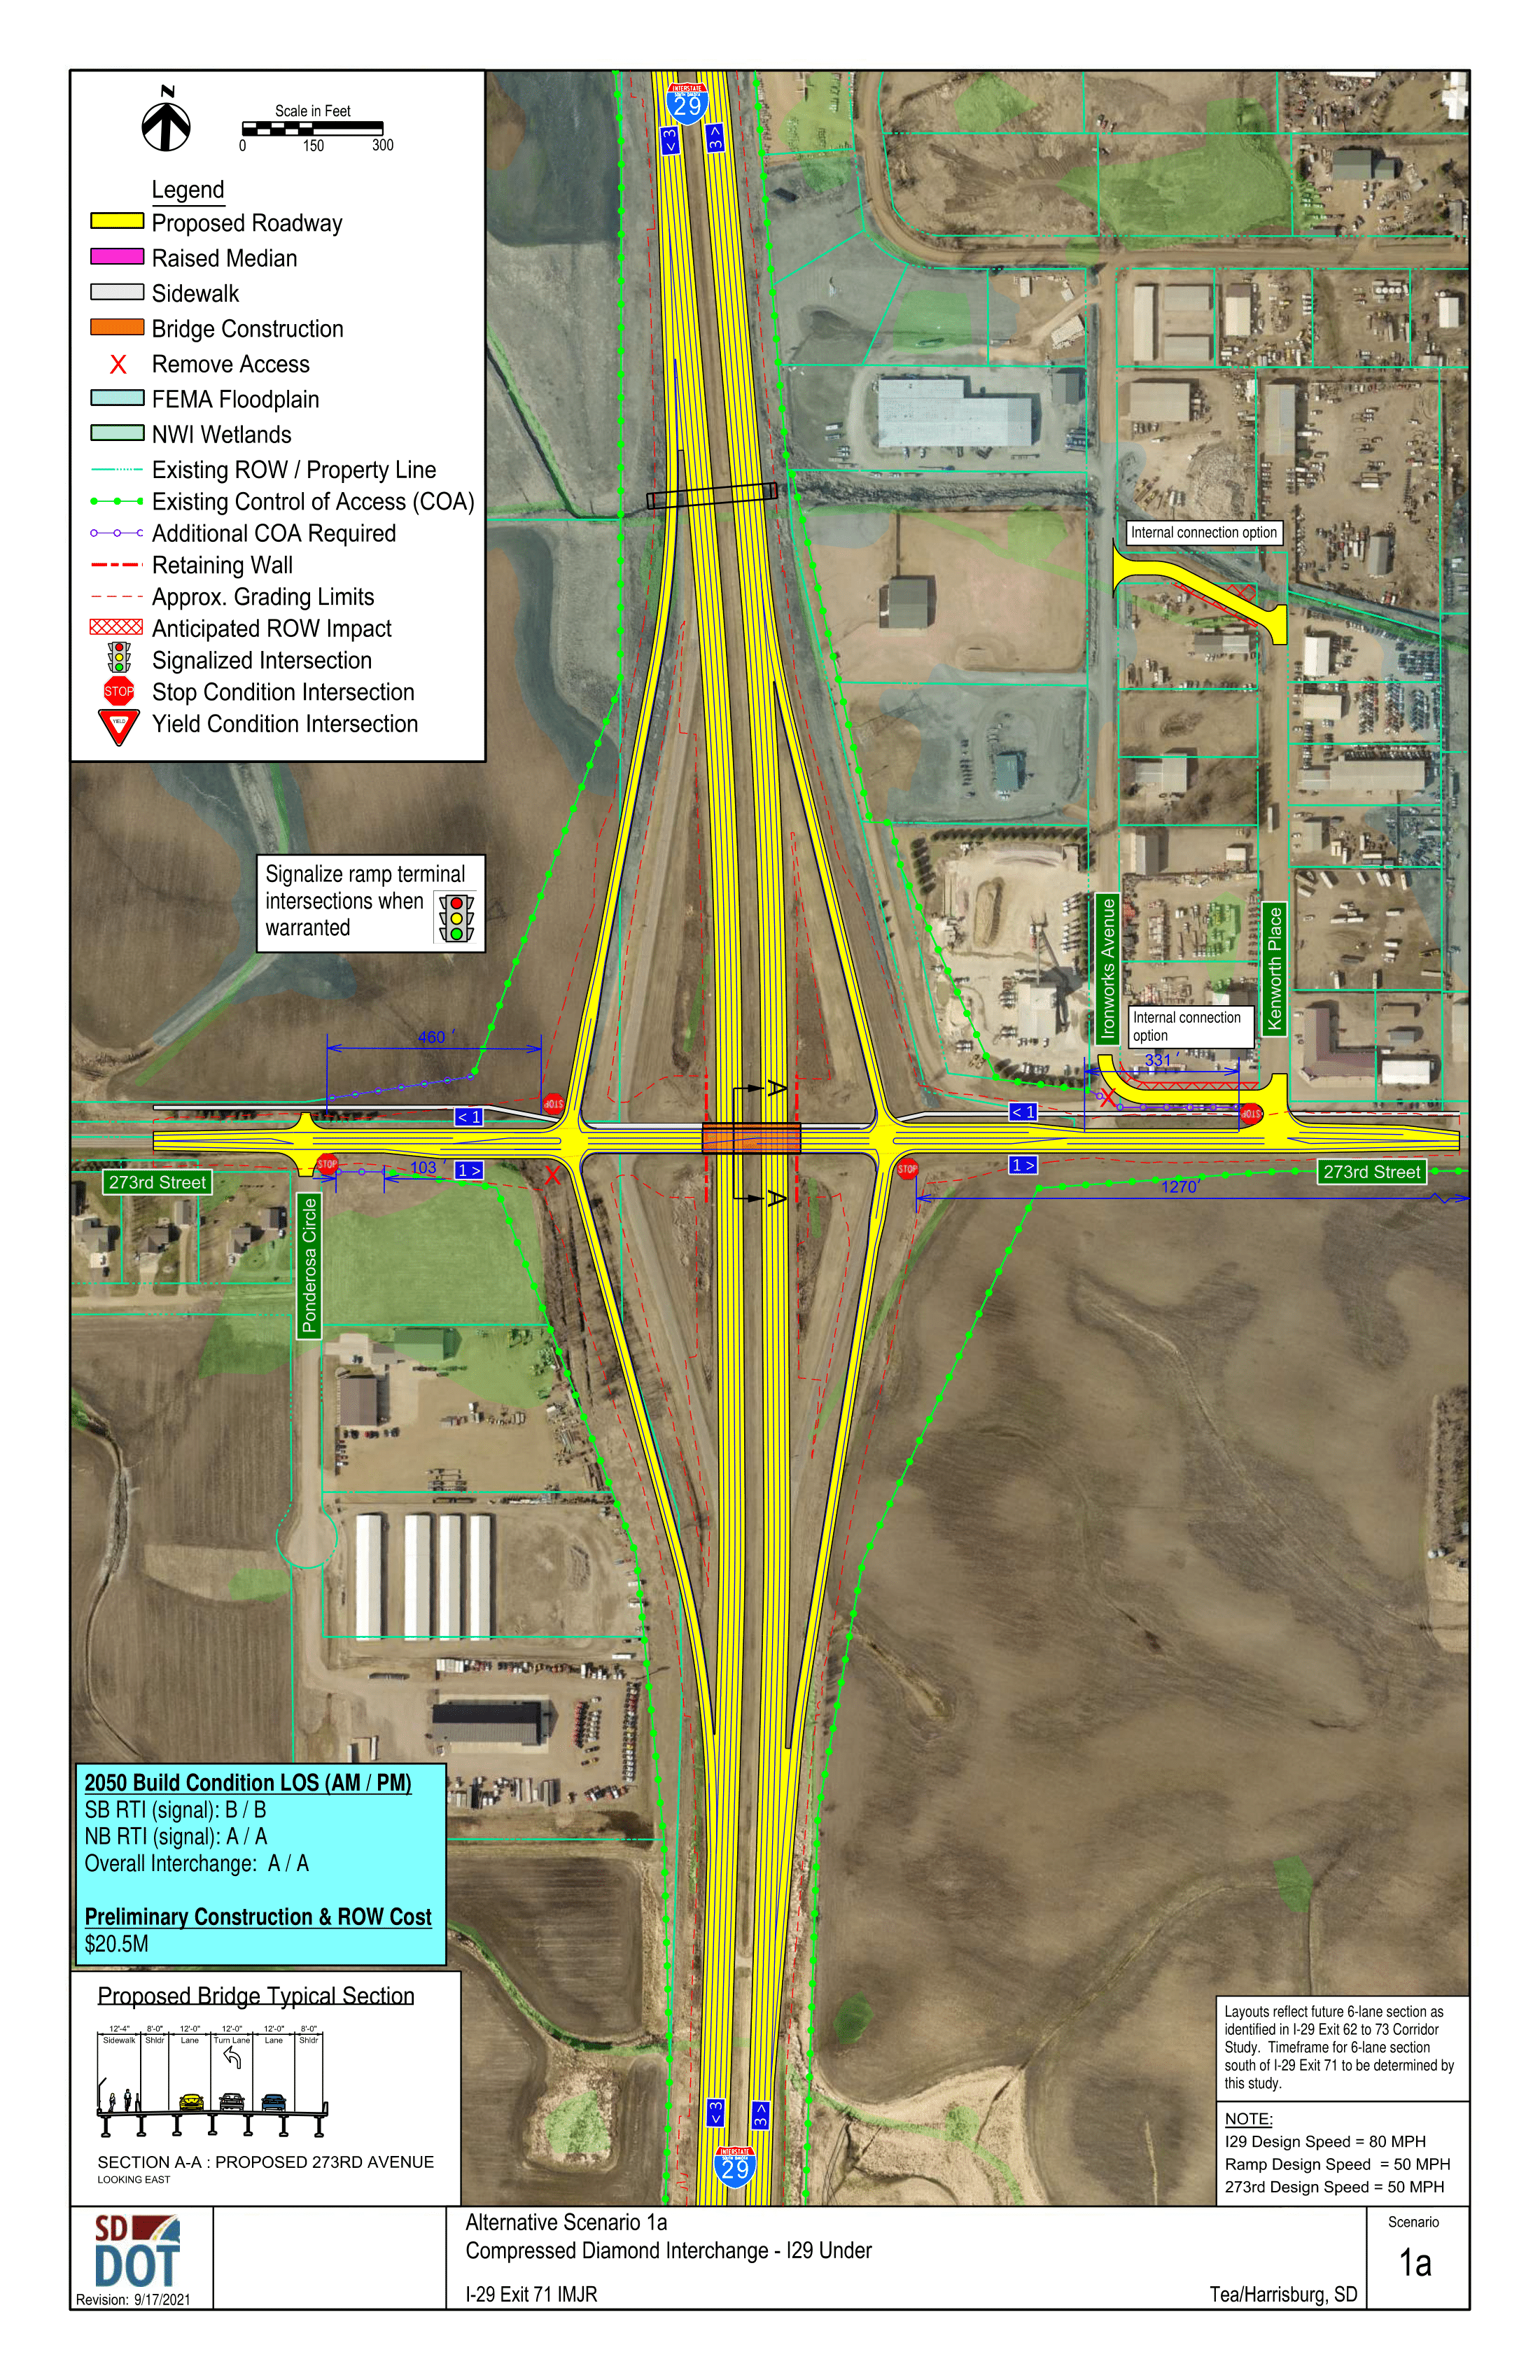 This image shows the conceptual layout of a Compressed Diamond Interchange, and what the road under it would look like. Details on the diagram include proposed roadway, raised median, sidewalk, bridge construction, access control, FEMA floodplain, NWI wetlands, existing Right of Ways and property lines, existing control of access points, additional control of access points needed, retaining walls, grading limits, anticipated right of way impacts, signalized intersections, stop condition intersections and yield condition intersections. 